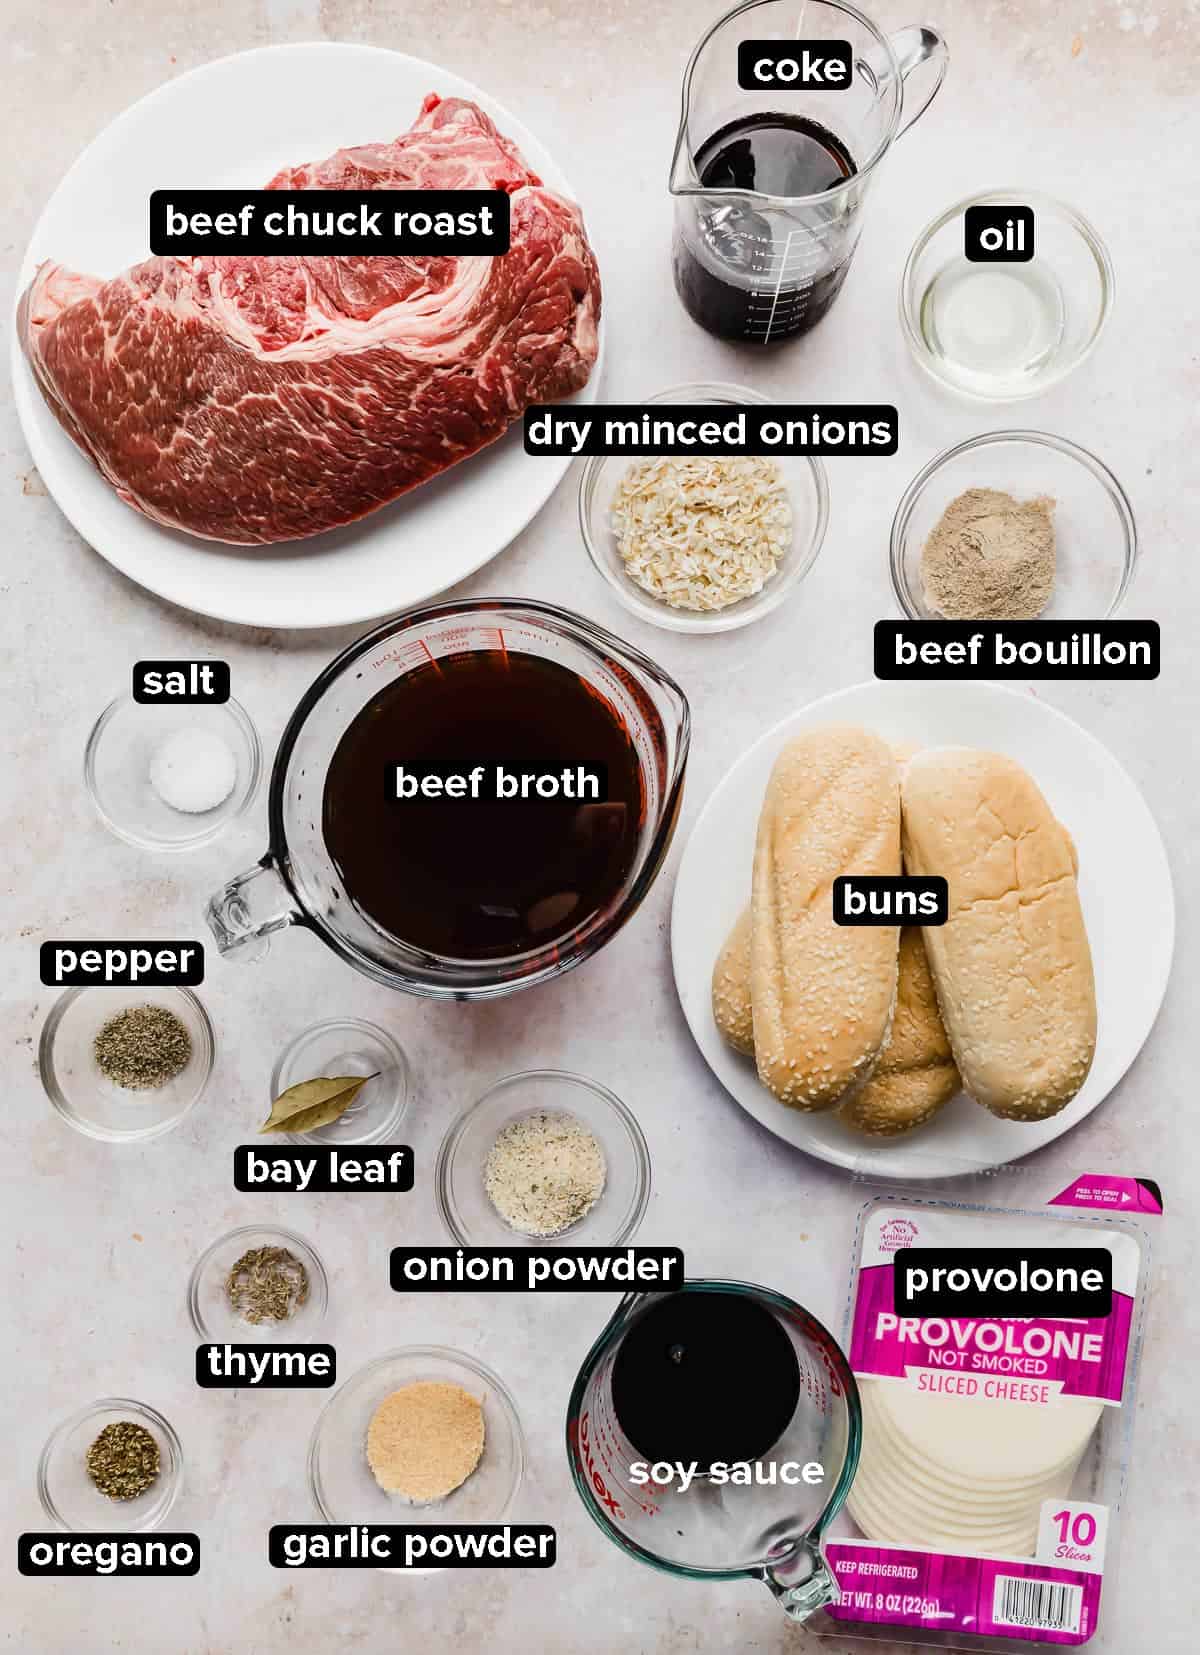 Ingredients used to make the easiest crock pot French dip sandwiches.